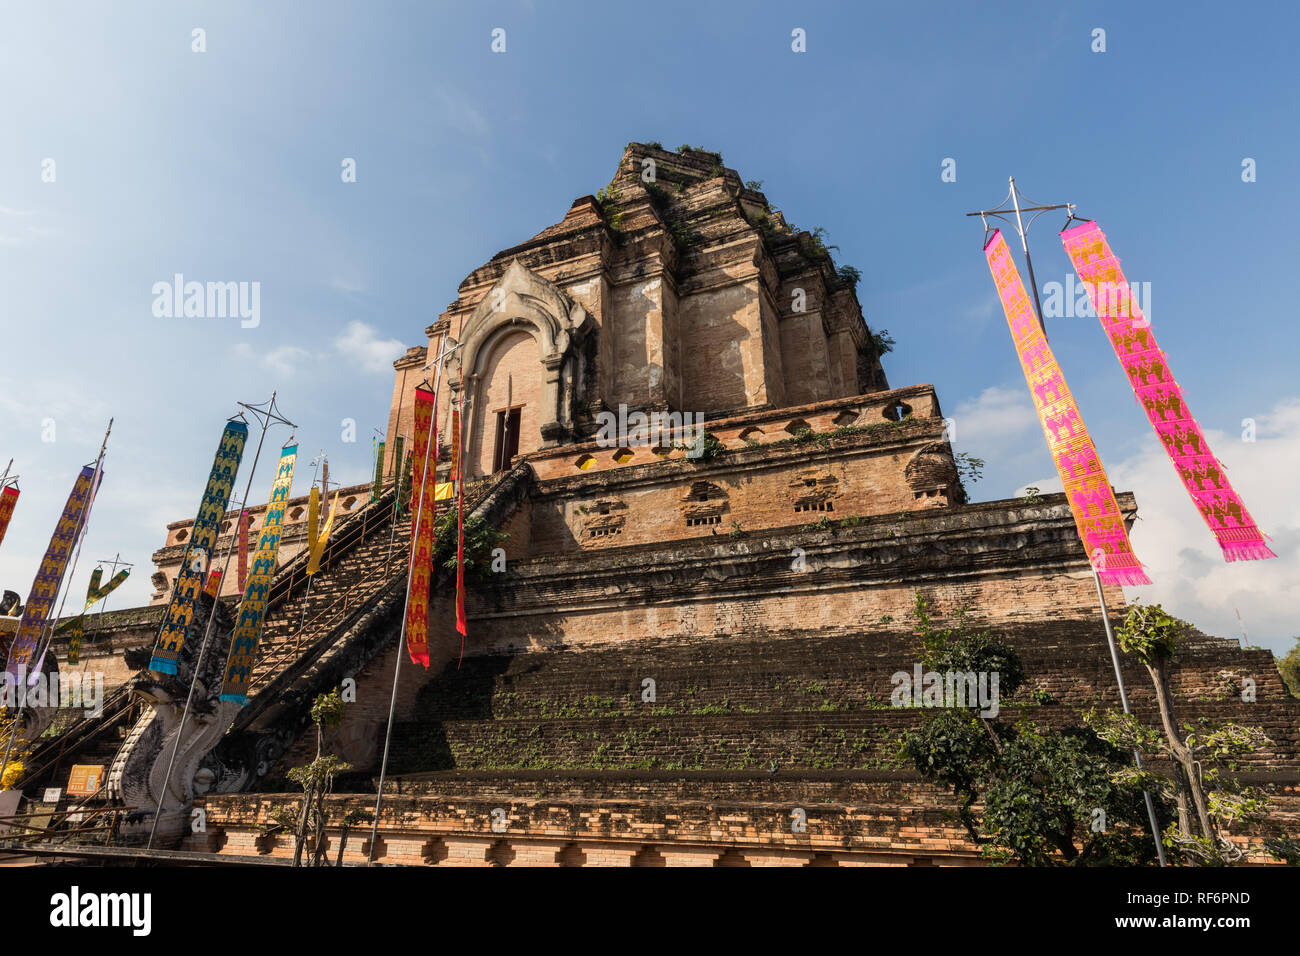 Wat Chedi Luang 'temple of the big stupa' is a Buddhist temple in the historic center of Chiang Mai. King Saen Muang Ma began building Phra Chedi Luan Stock Photo